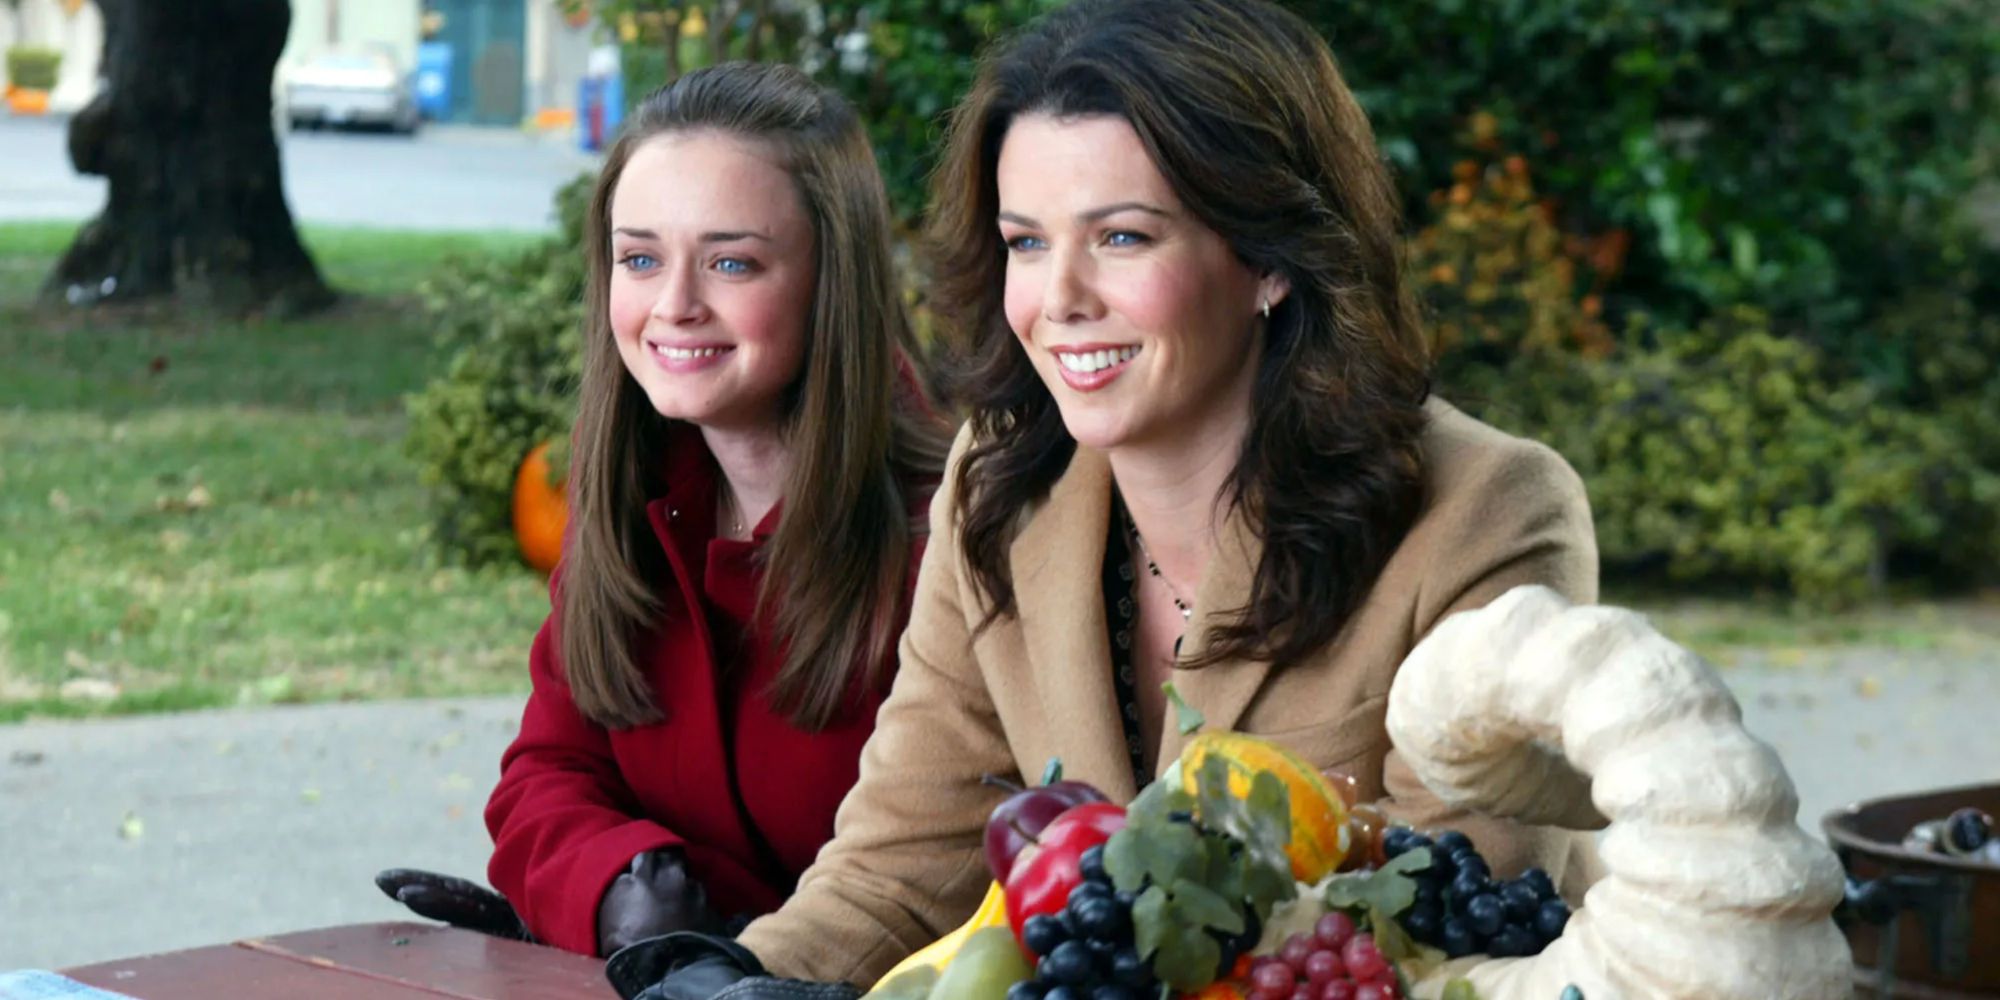 Lauren Graham and Alexis Bledel as Lorelai and Rory Gilmore, sitting at a picnic table smiling on Gilmore Girls